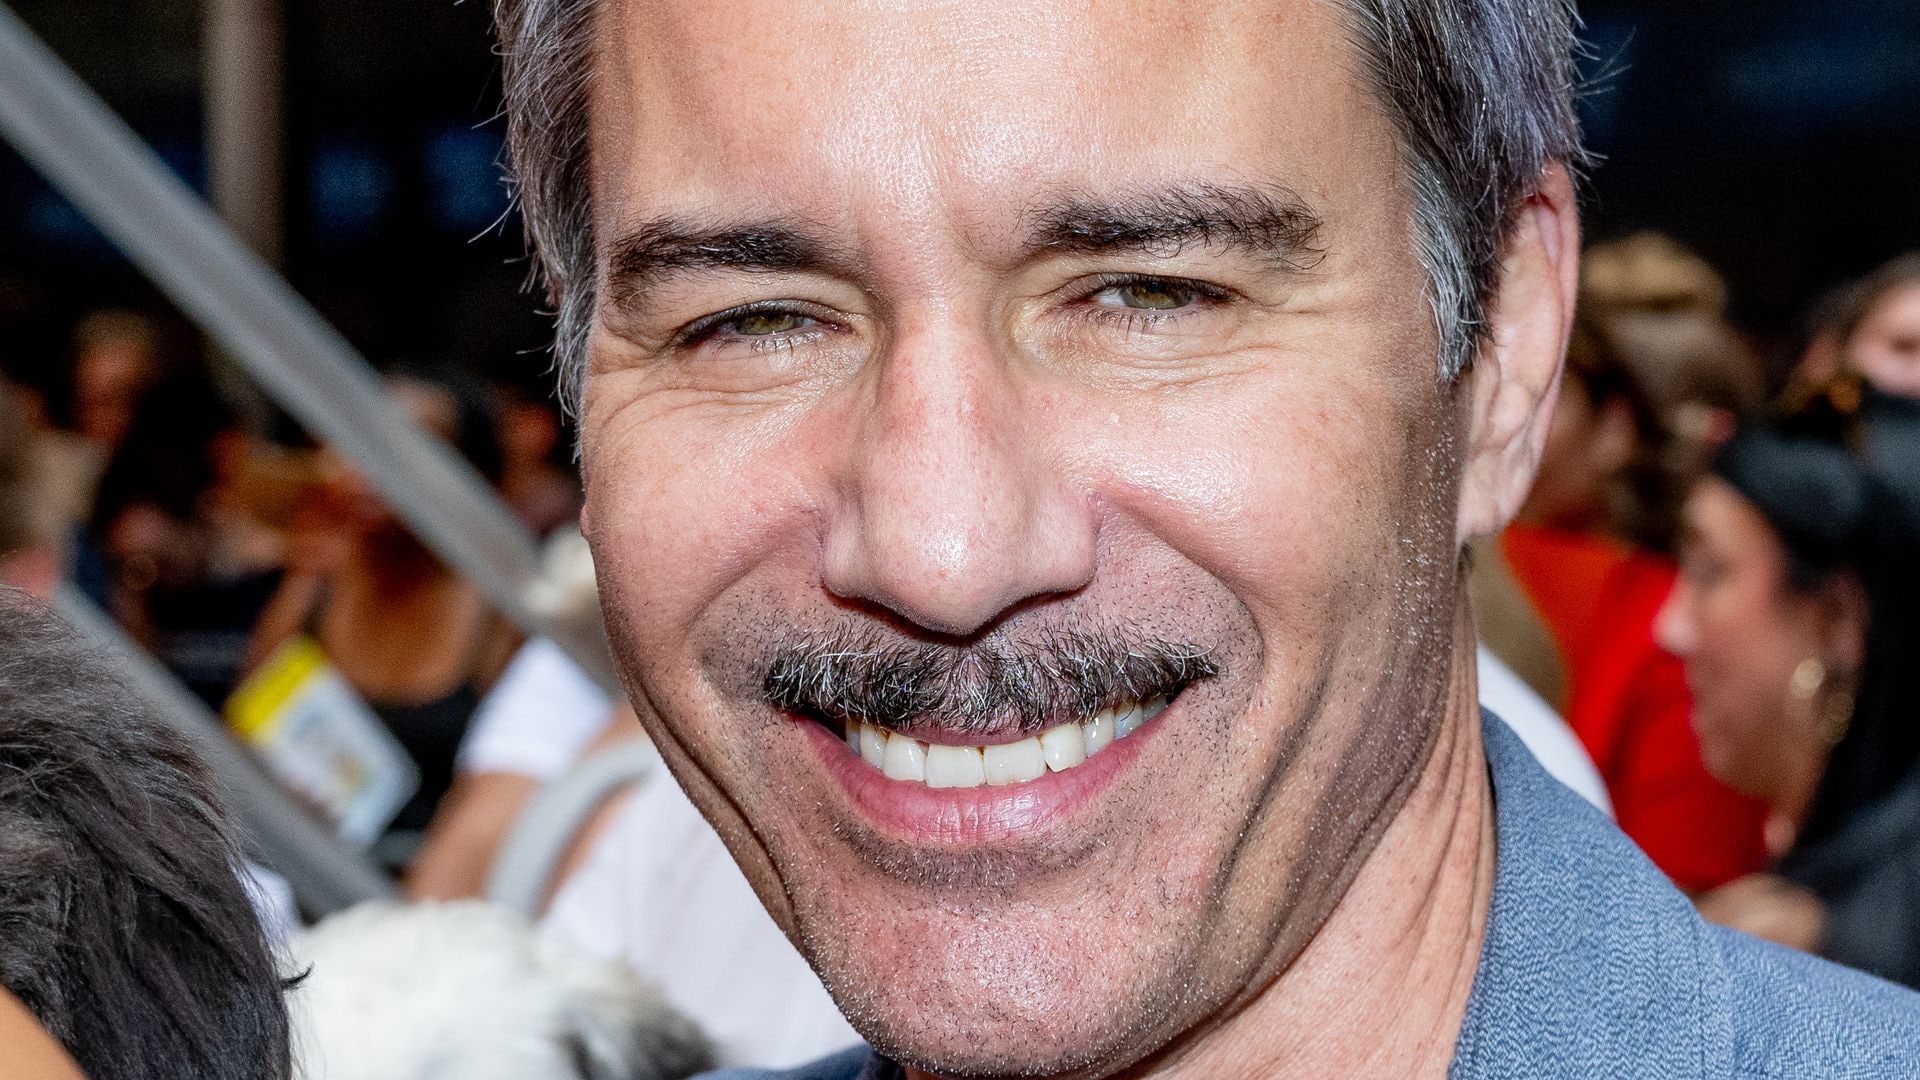 Eric McCormack smiling in a close-up photo